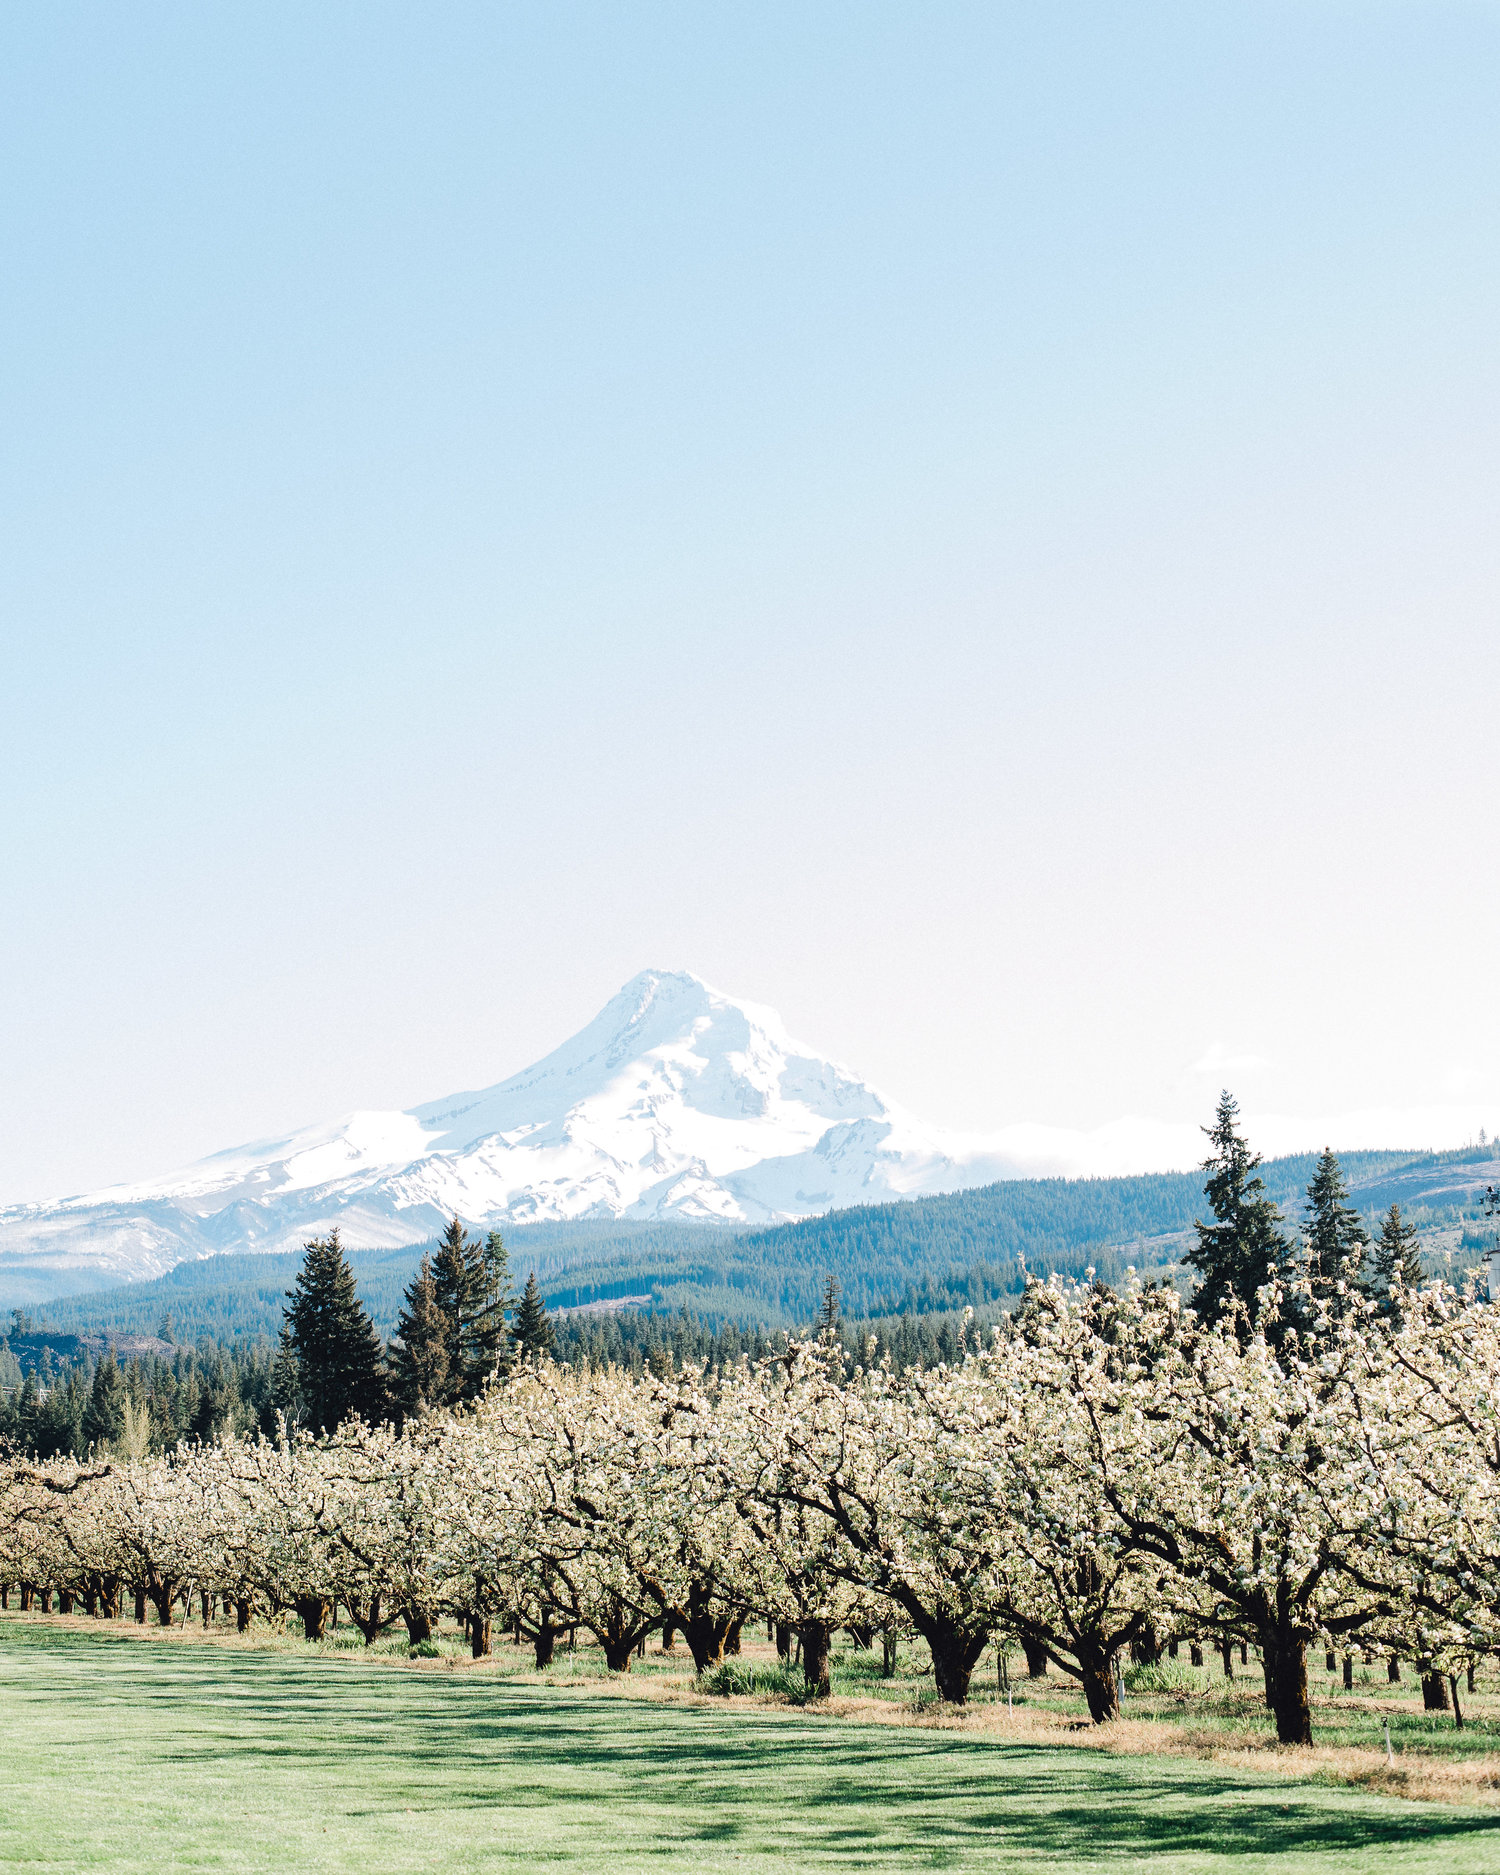 The orchard hood river